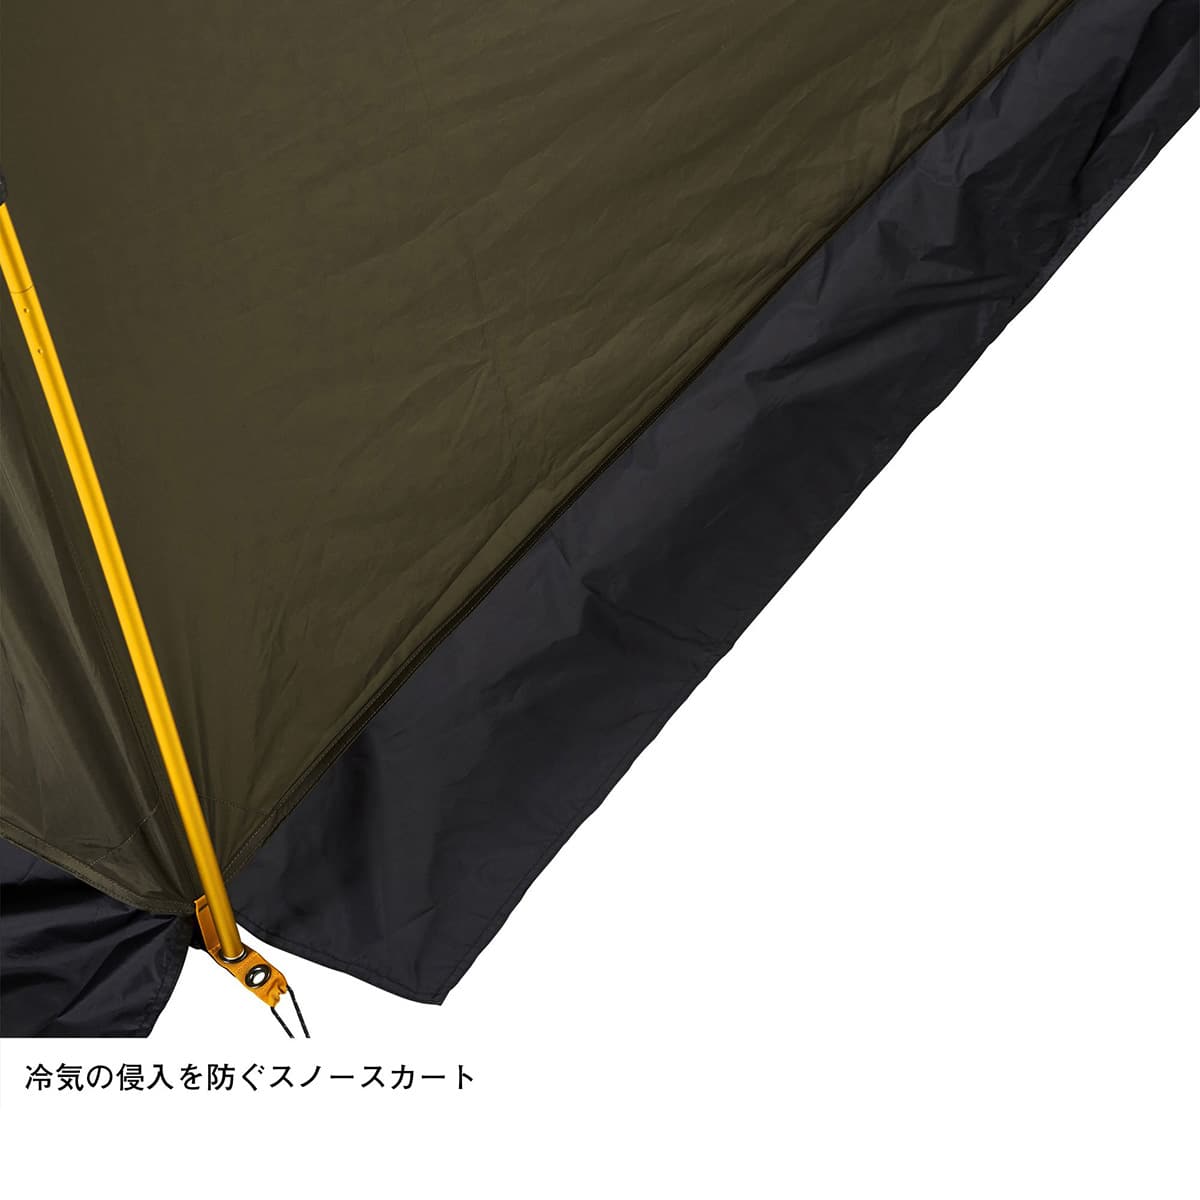 THE NORTH FACE EVACARGO 2 ニュートープ 23SS-I